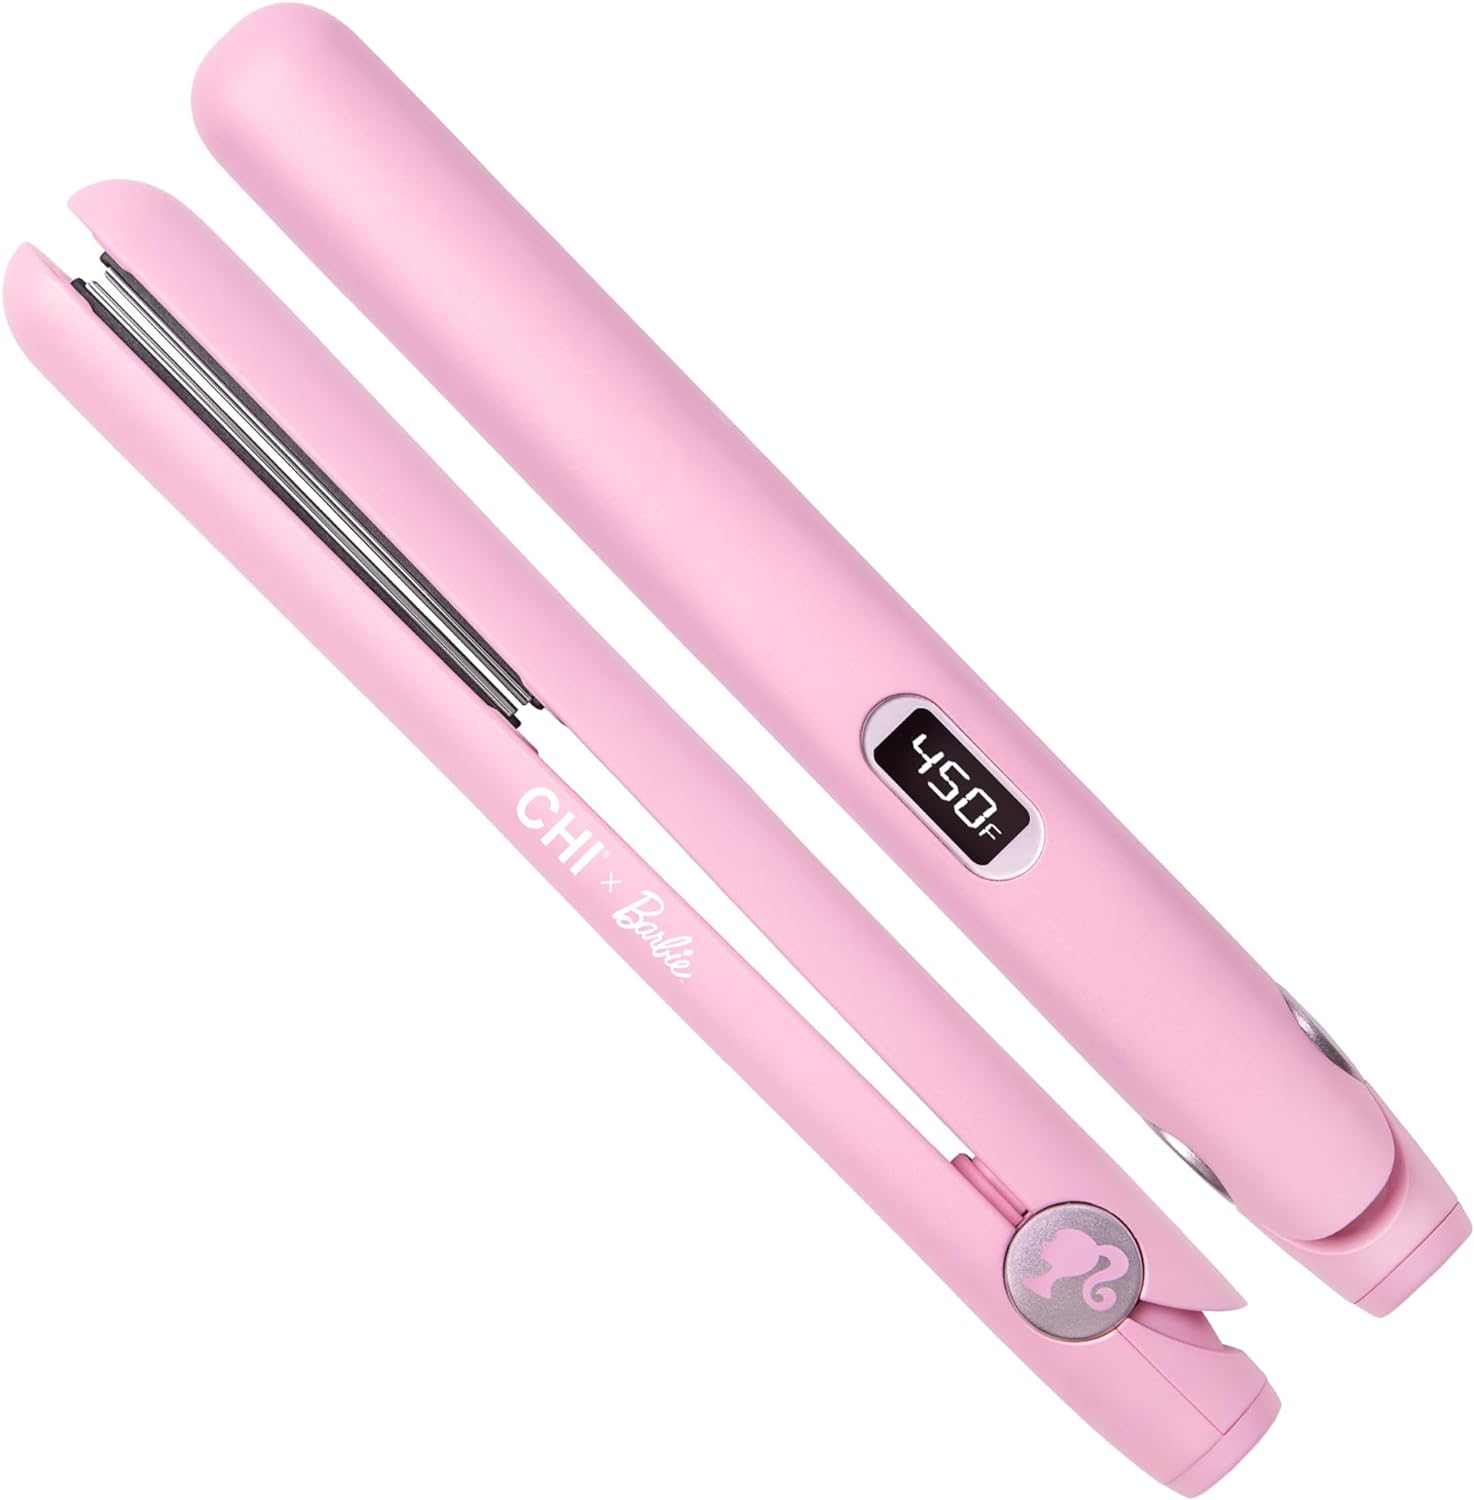 Buy CHI x Barbie 1 Inch Titanium Hairstyling Iron - Pink on Amazon.com ? FREE SHIPPING on qualified orders